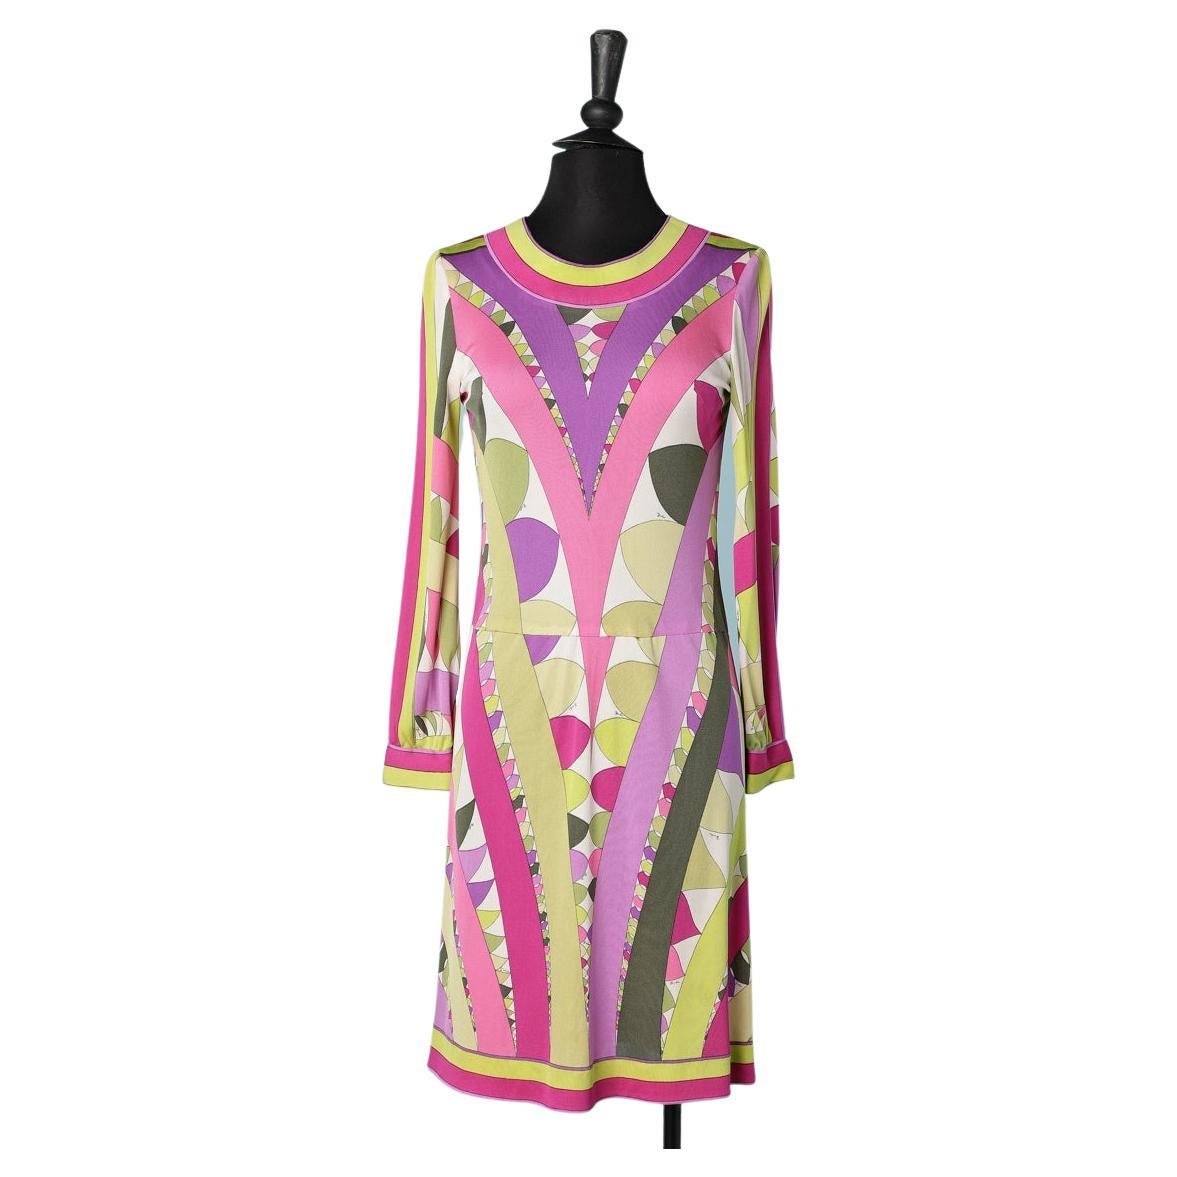 1960's silk branded jersey printed dress Emilio Pucci for Saks Fifth Avenue 